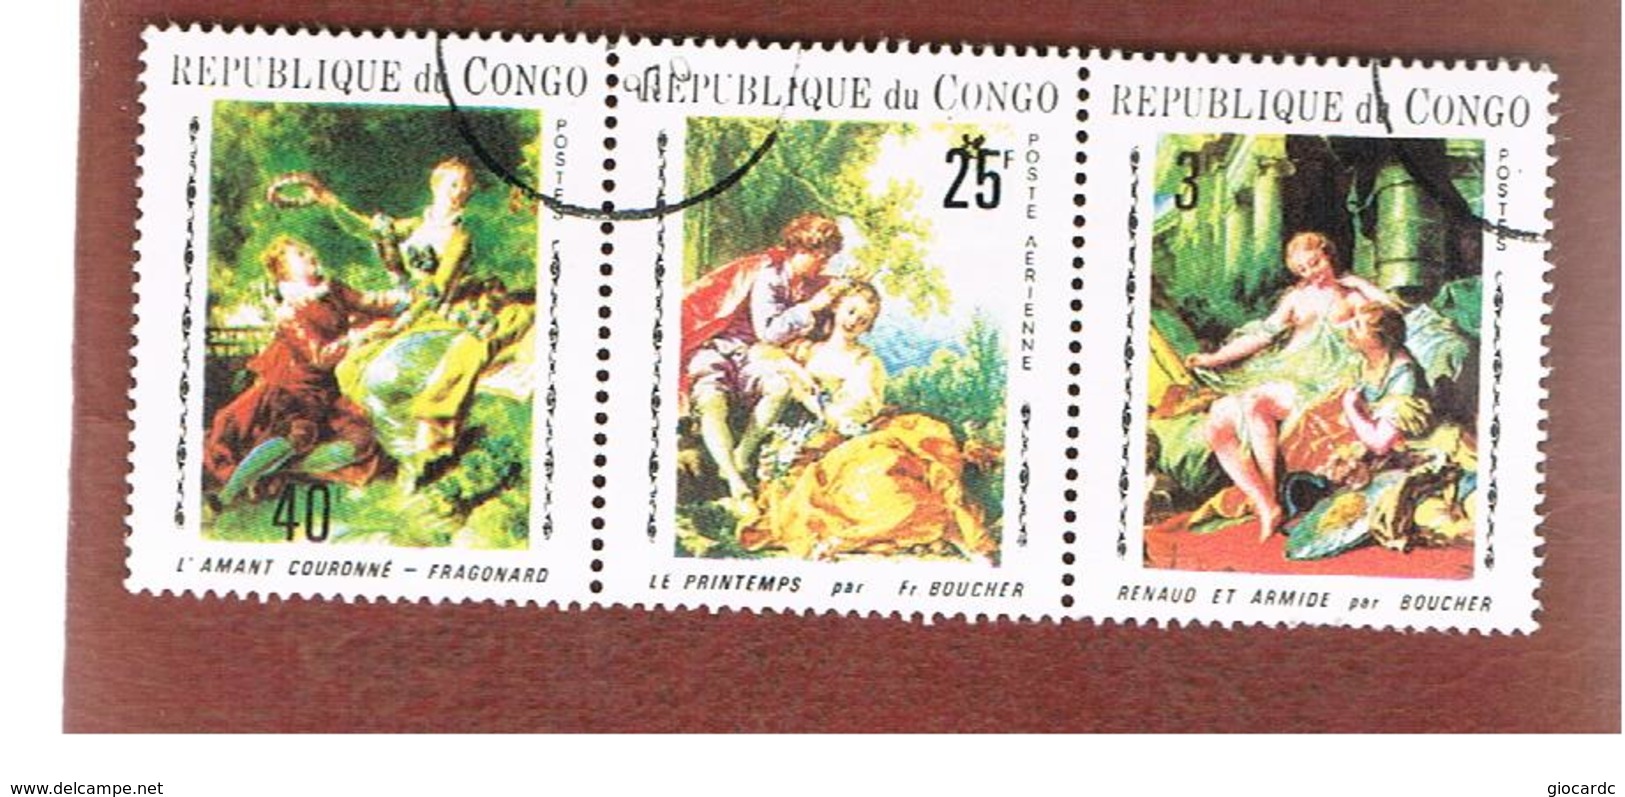 CONGO (BRAZZAVILLE) - MI 222.224 -  1970  BAROQUE PAINTINGS (COMPLET SET OF 3 SE-TENANT) - USED ° - Usati